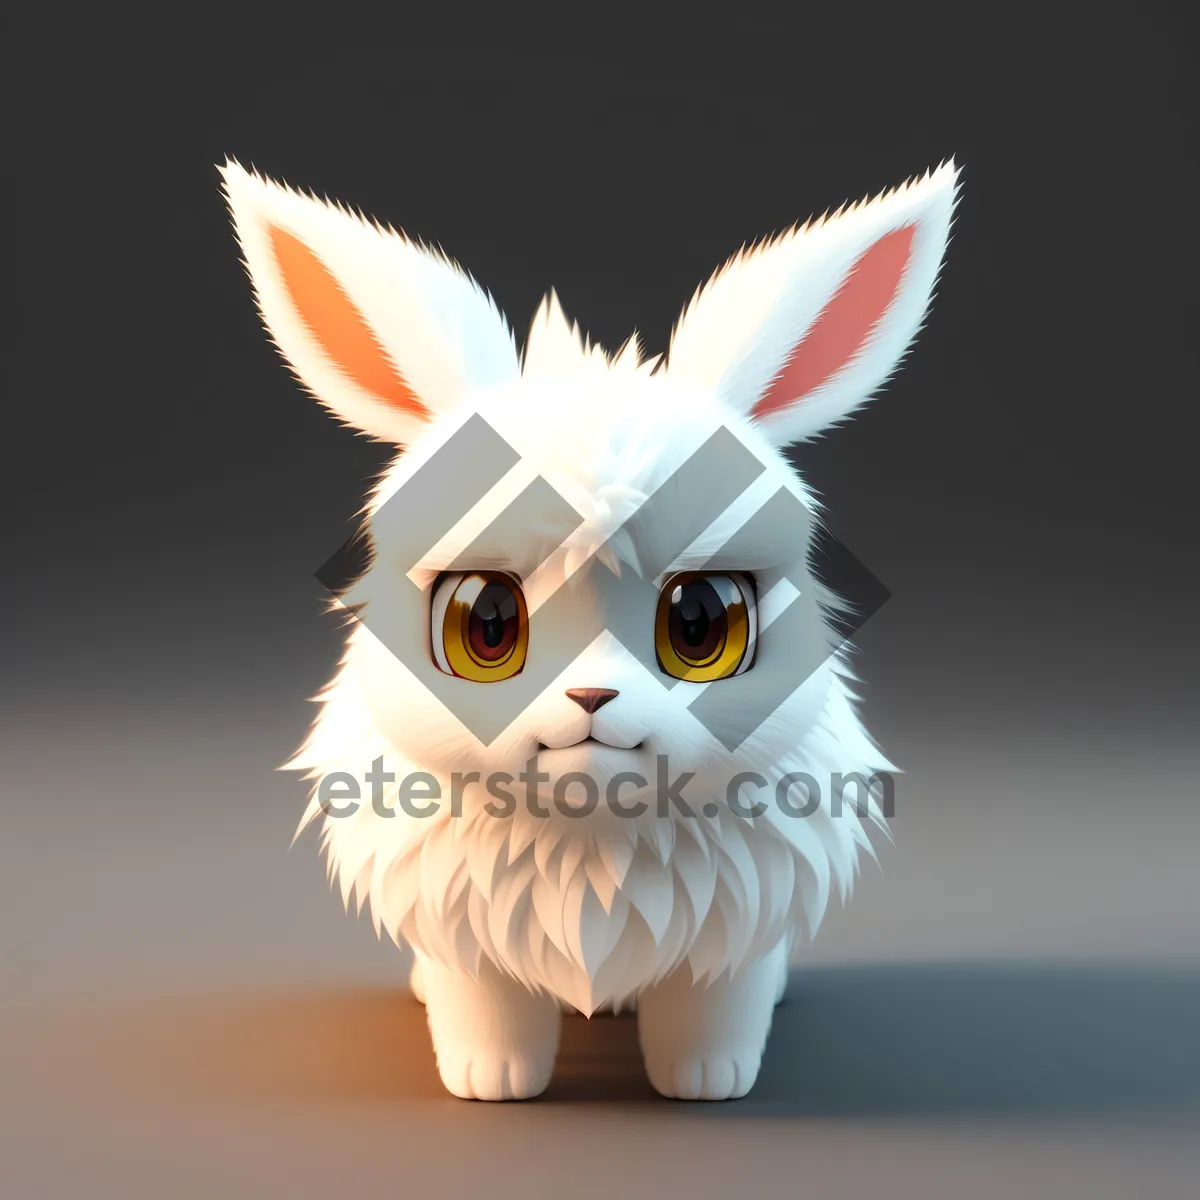 Picture of Fluffy Bunny Ears - Cute Cartoon Pet